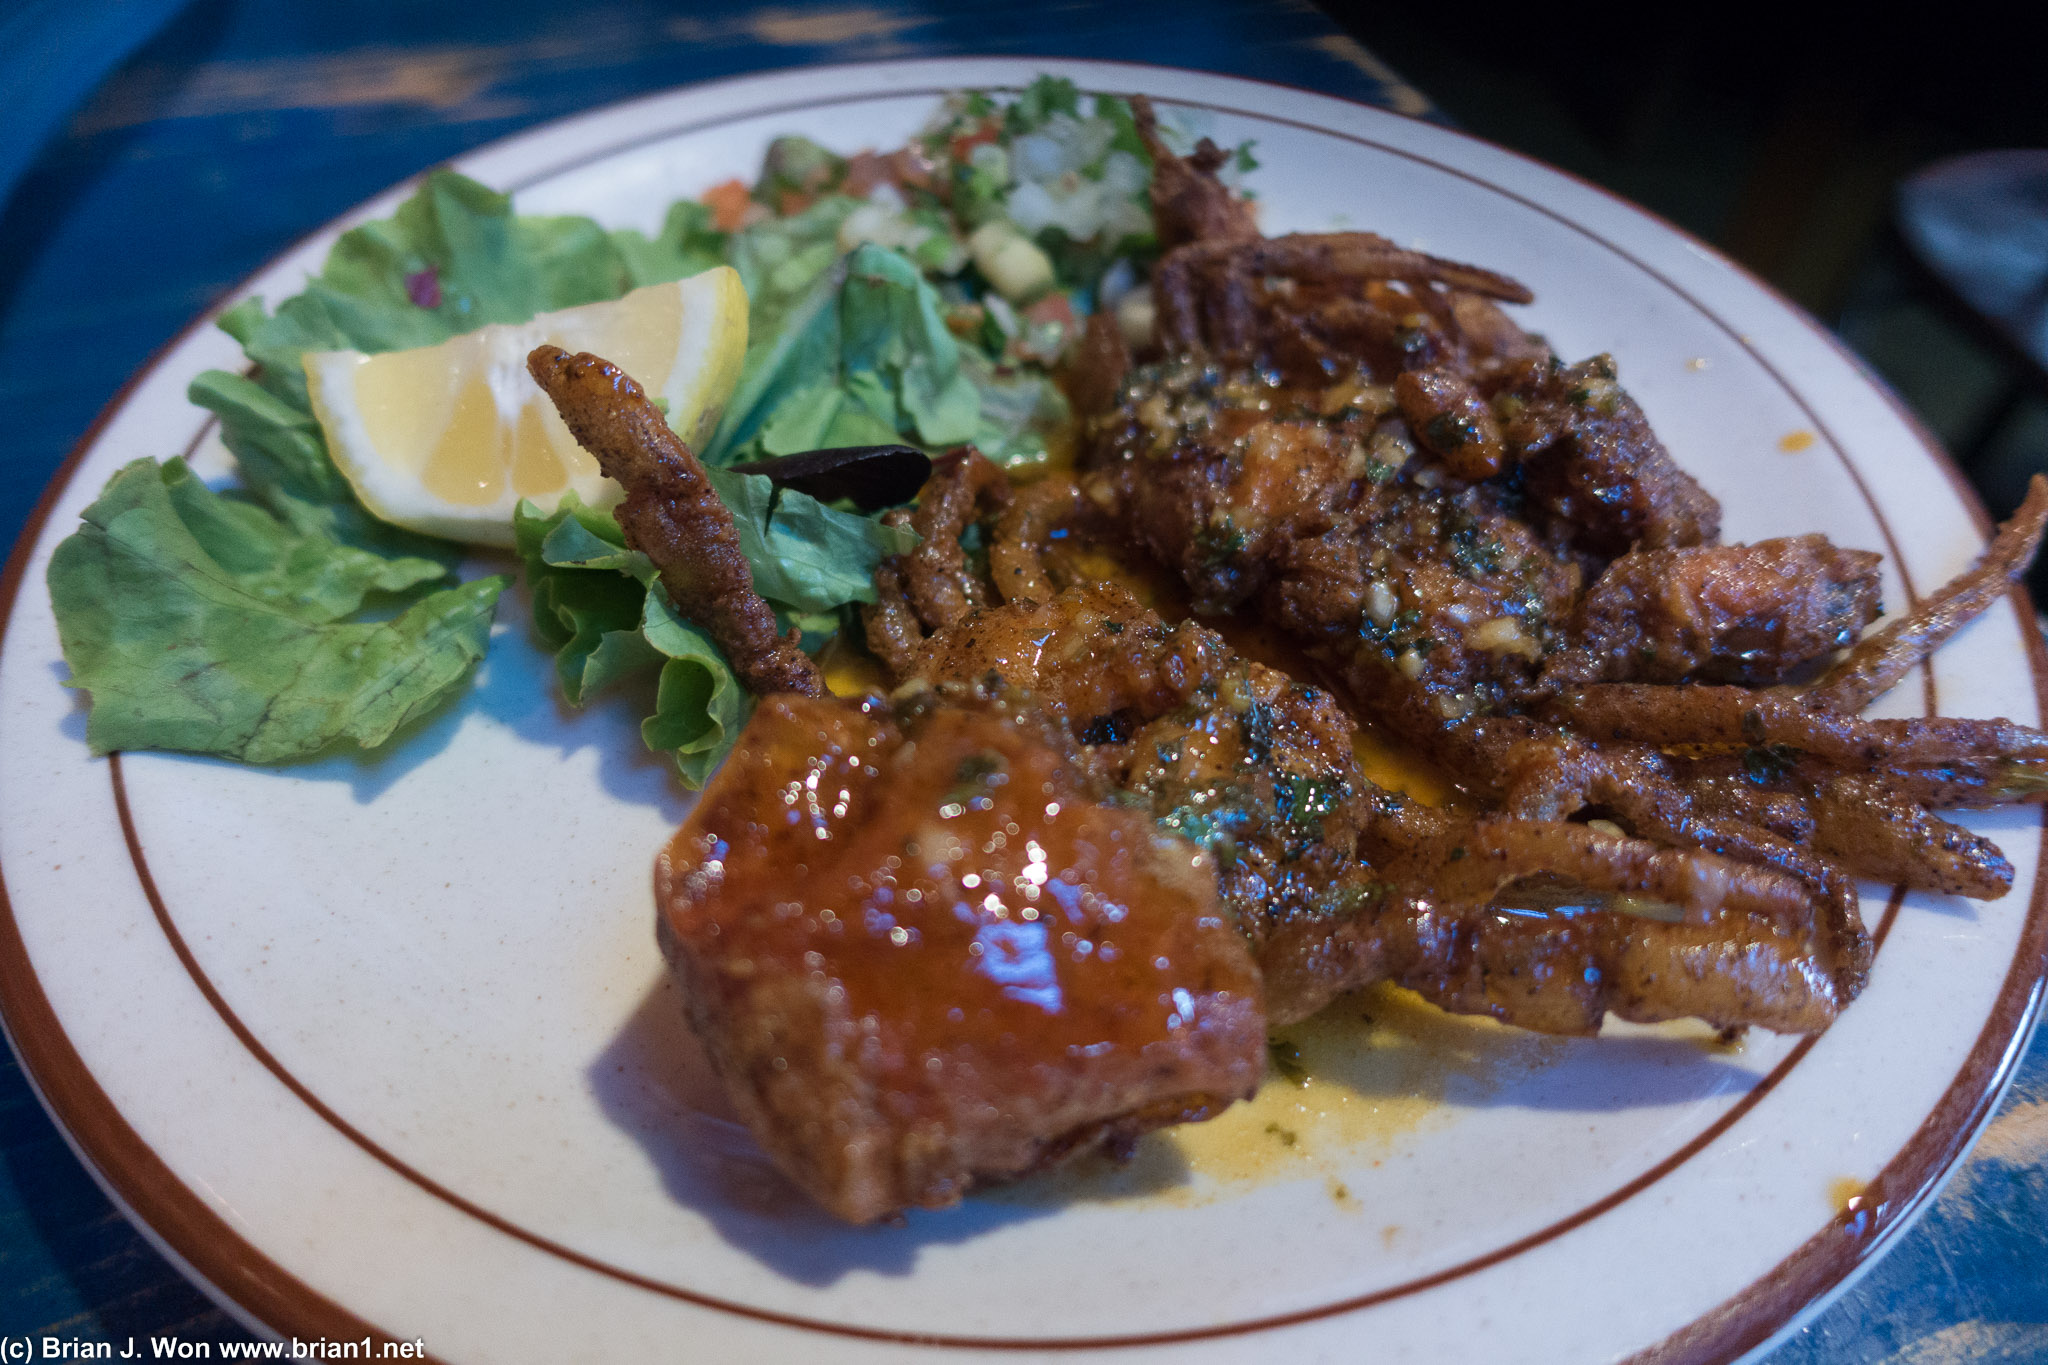 Soft shell crab was so-so.